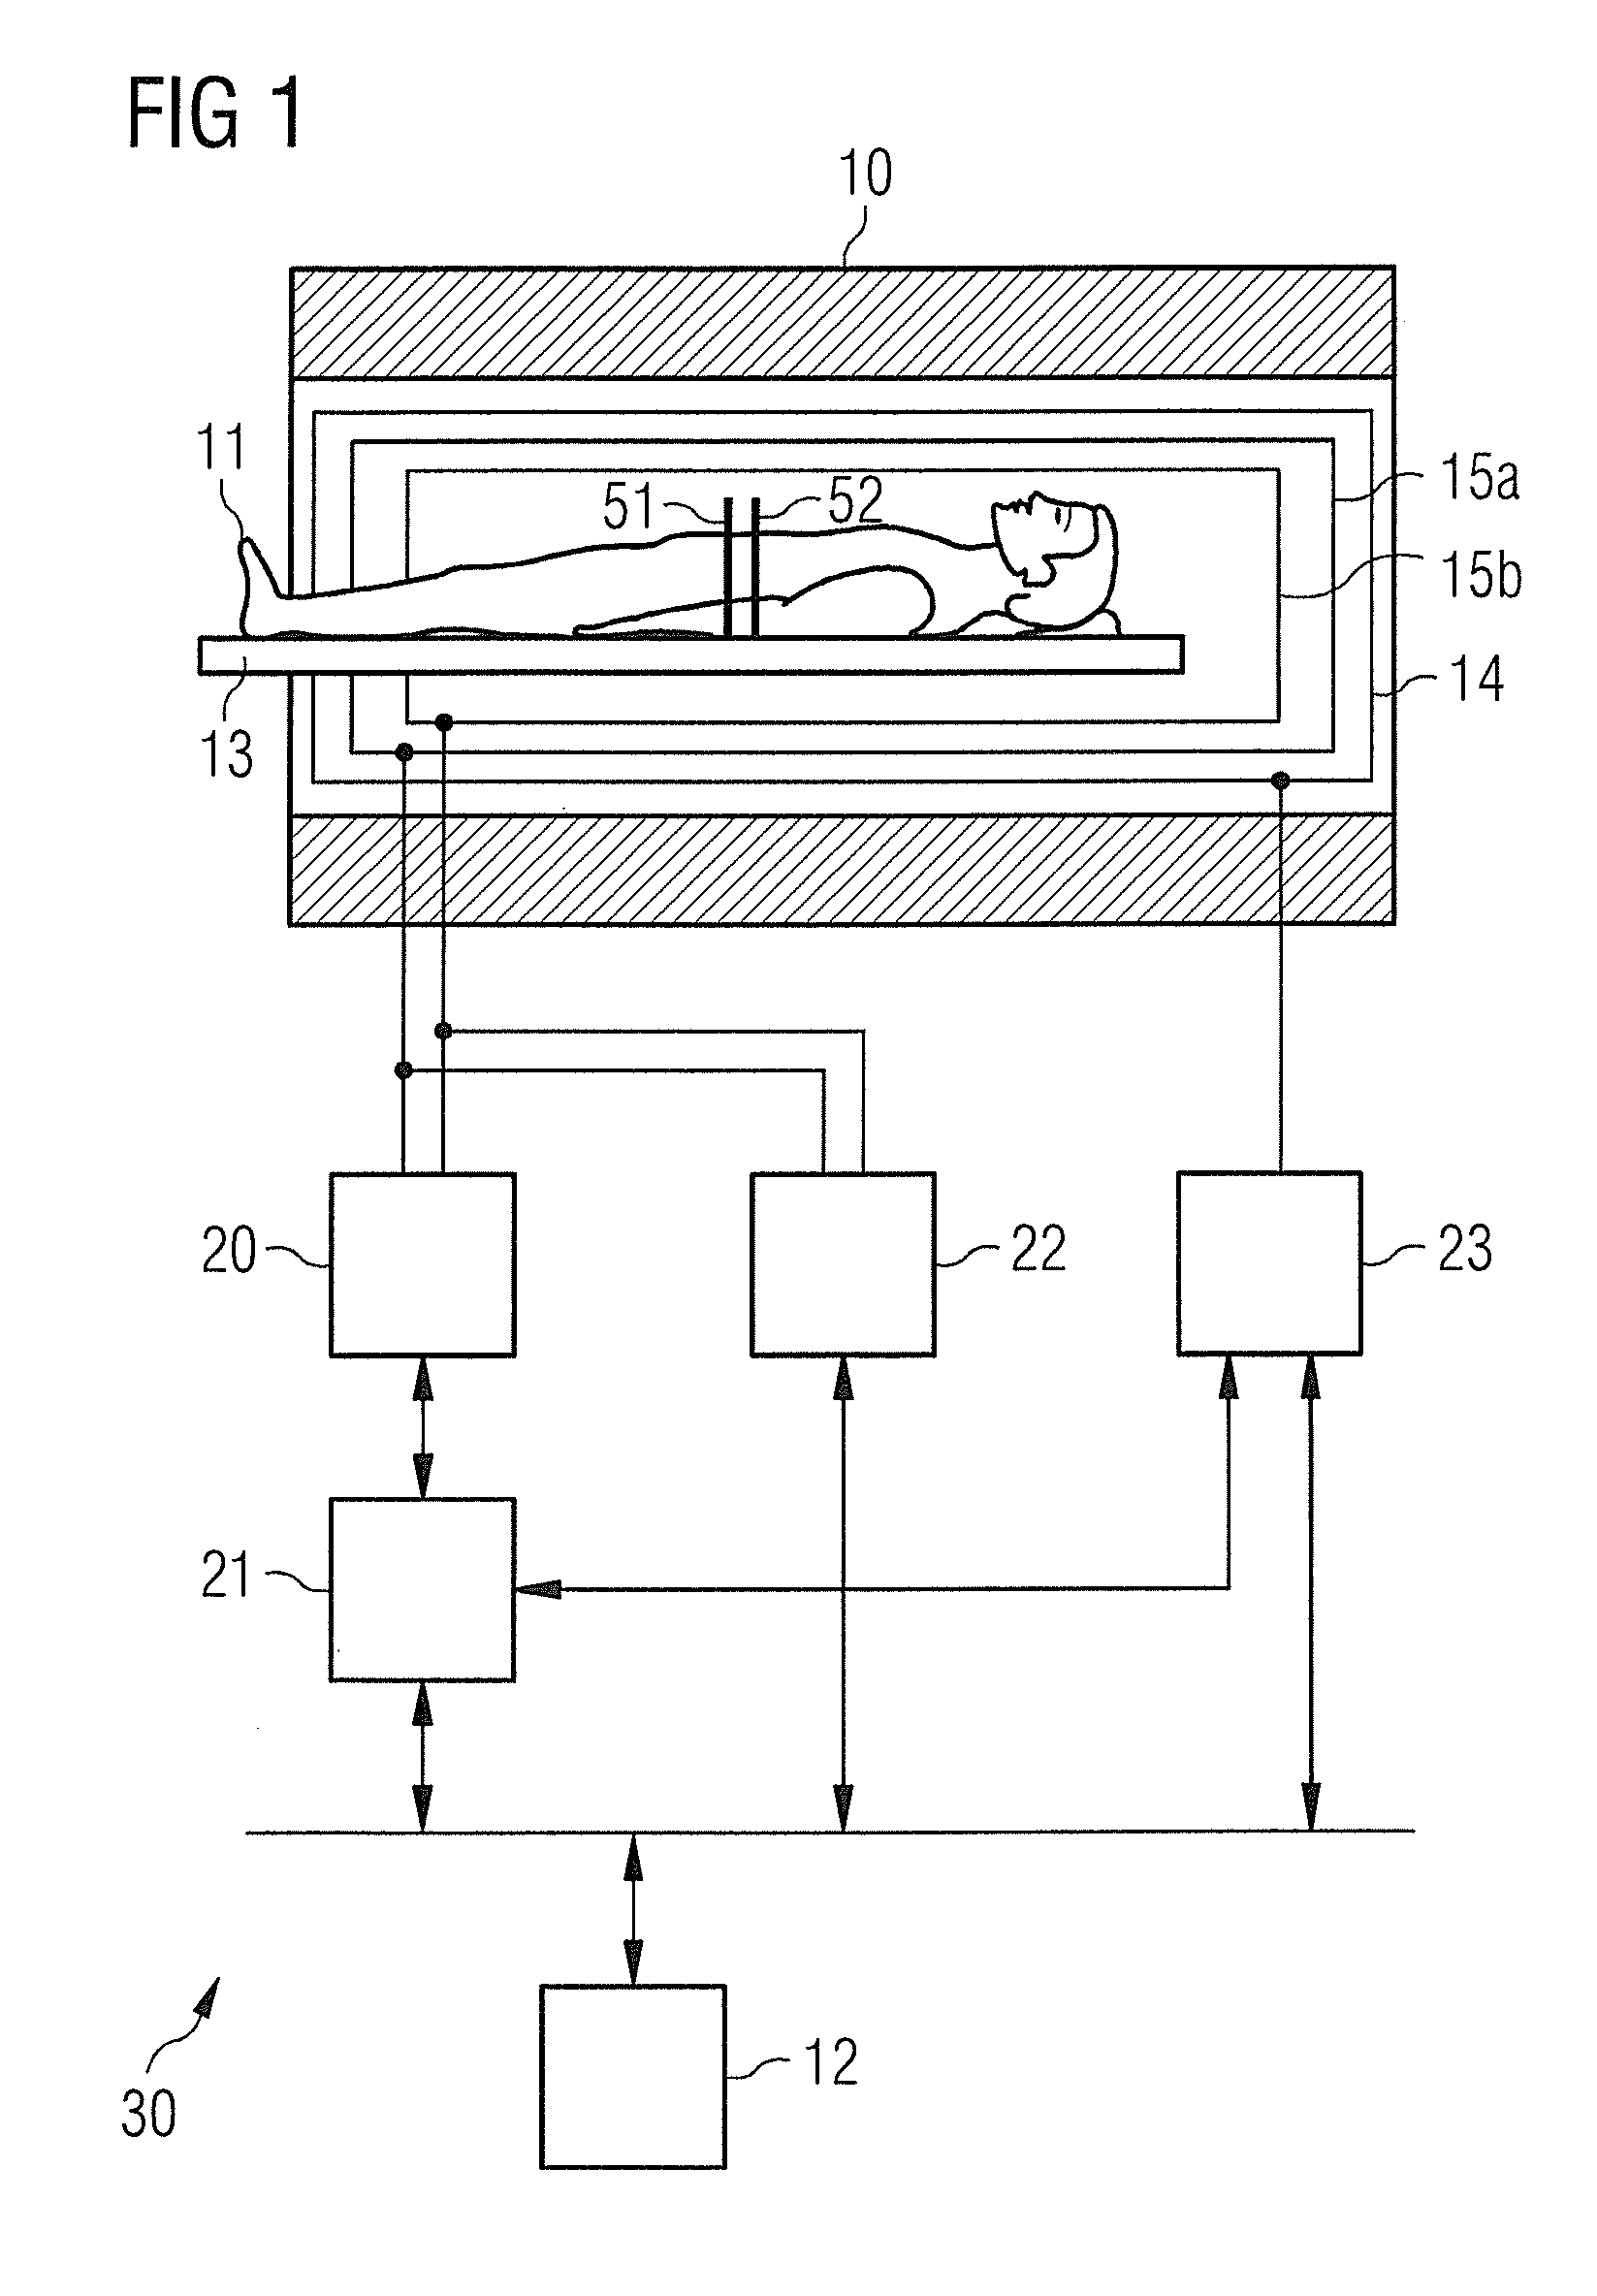 Magnetic Resonance System and Method for Rephasing Spin Systems in Slices in Slice Multiplexing Measurement Sequences for Magnetic Resonance Imaging